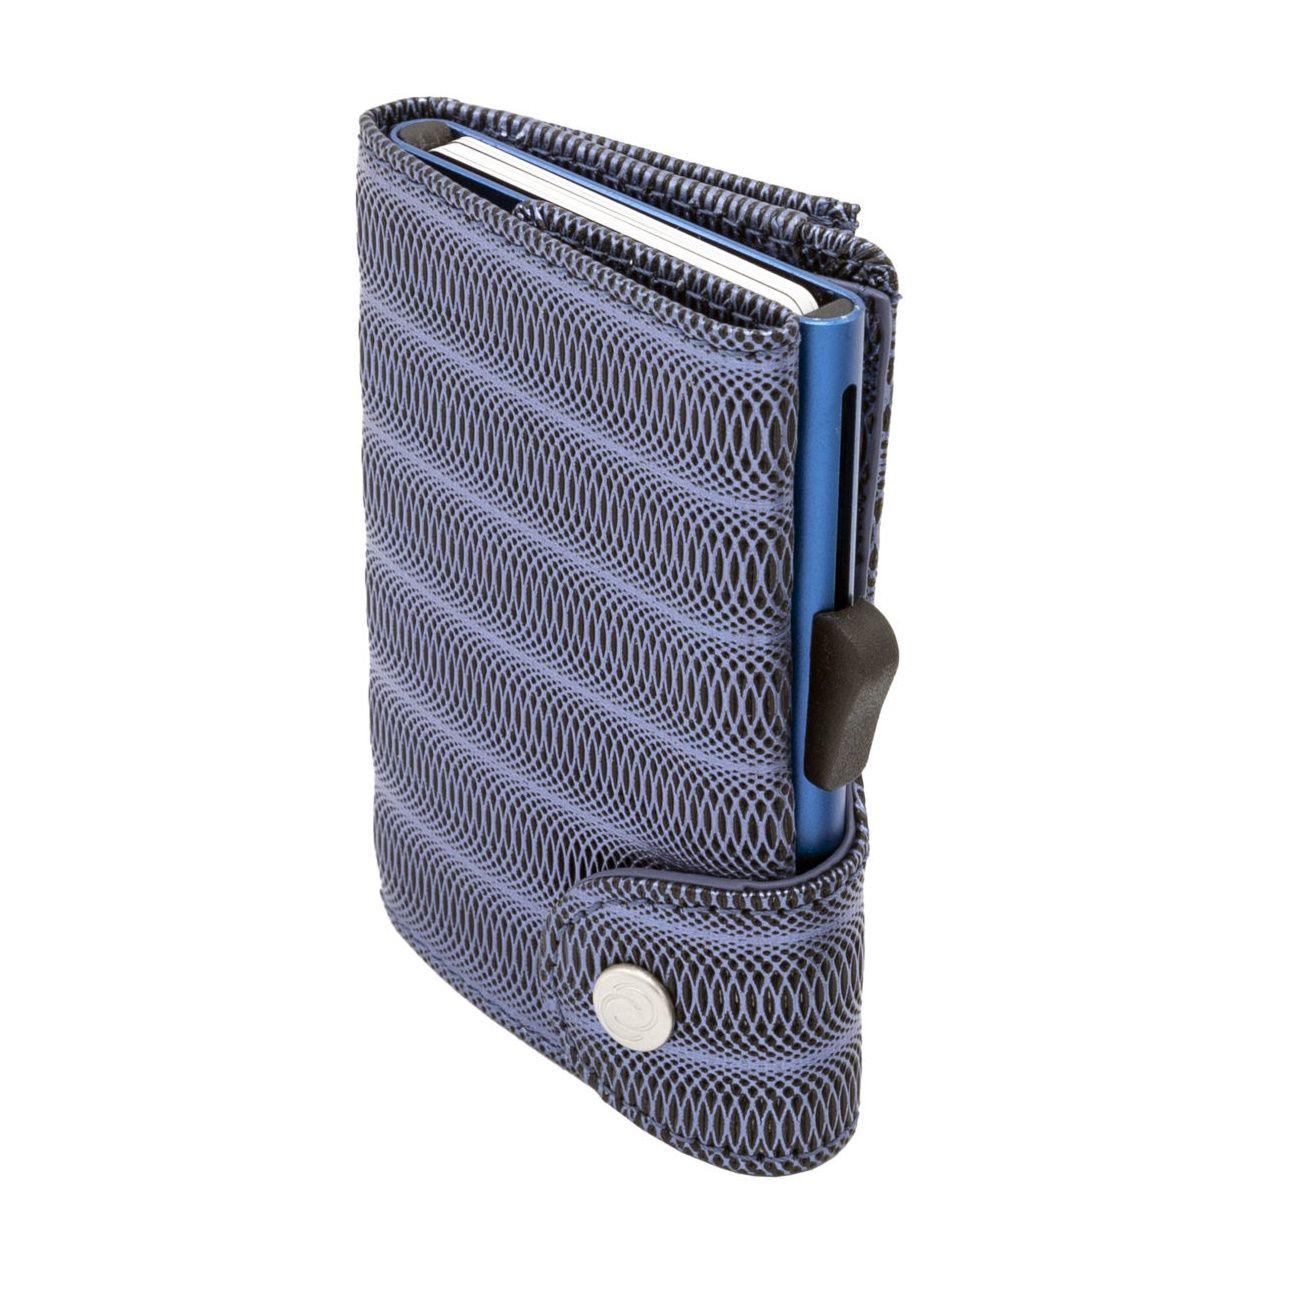 Aluminum Card Holder with Genuine Leather and Coin Pouch - Metallic Blue